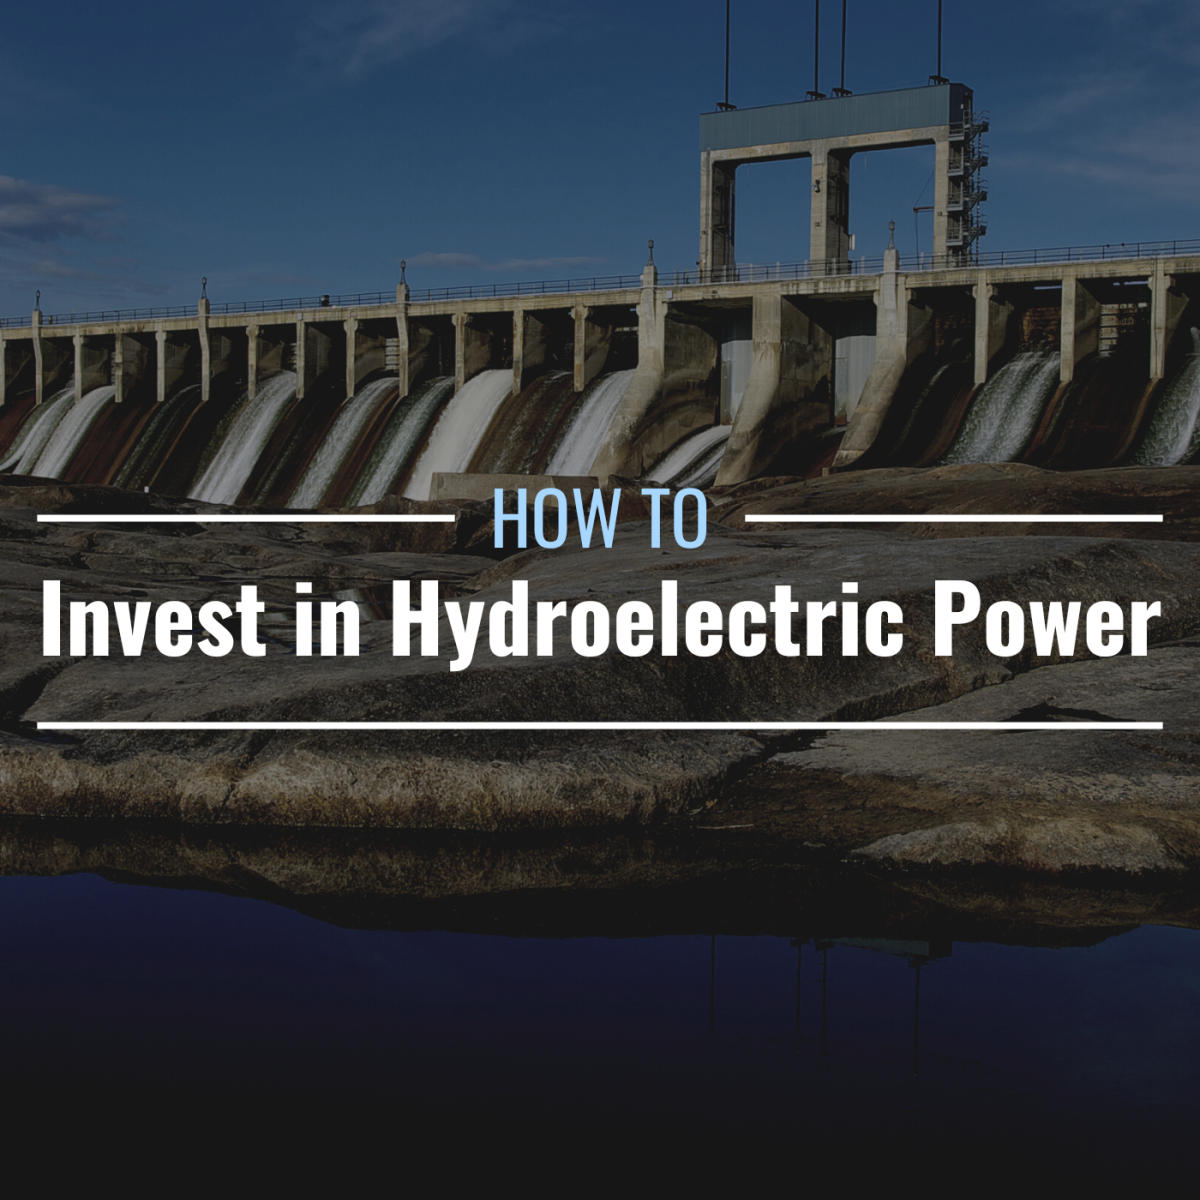 Photo of a hydroelectric power generating facility with text overlay that reads "How to Invest in Hydroelectric Power"